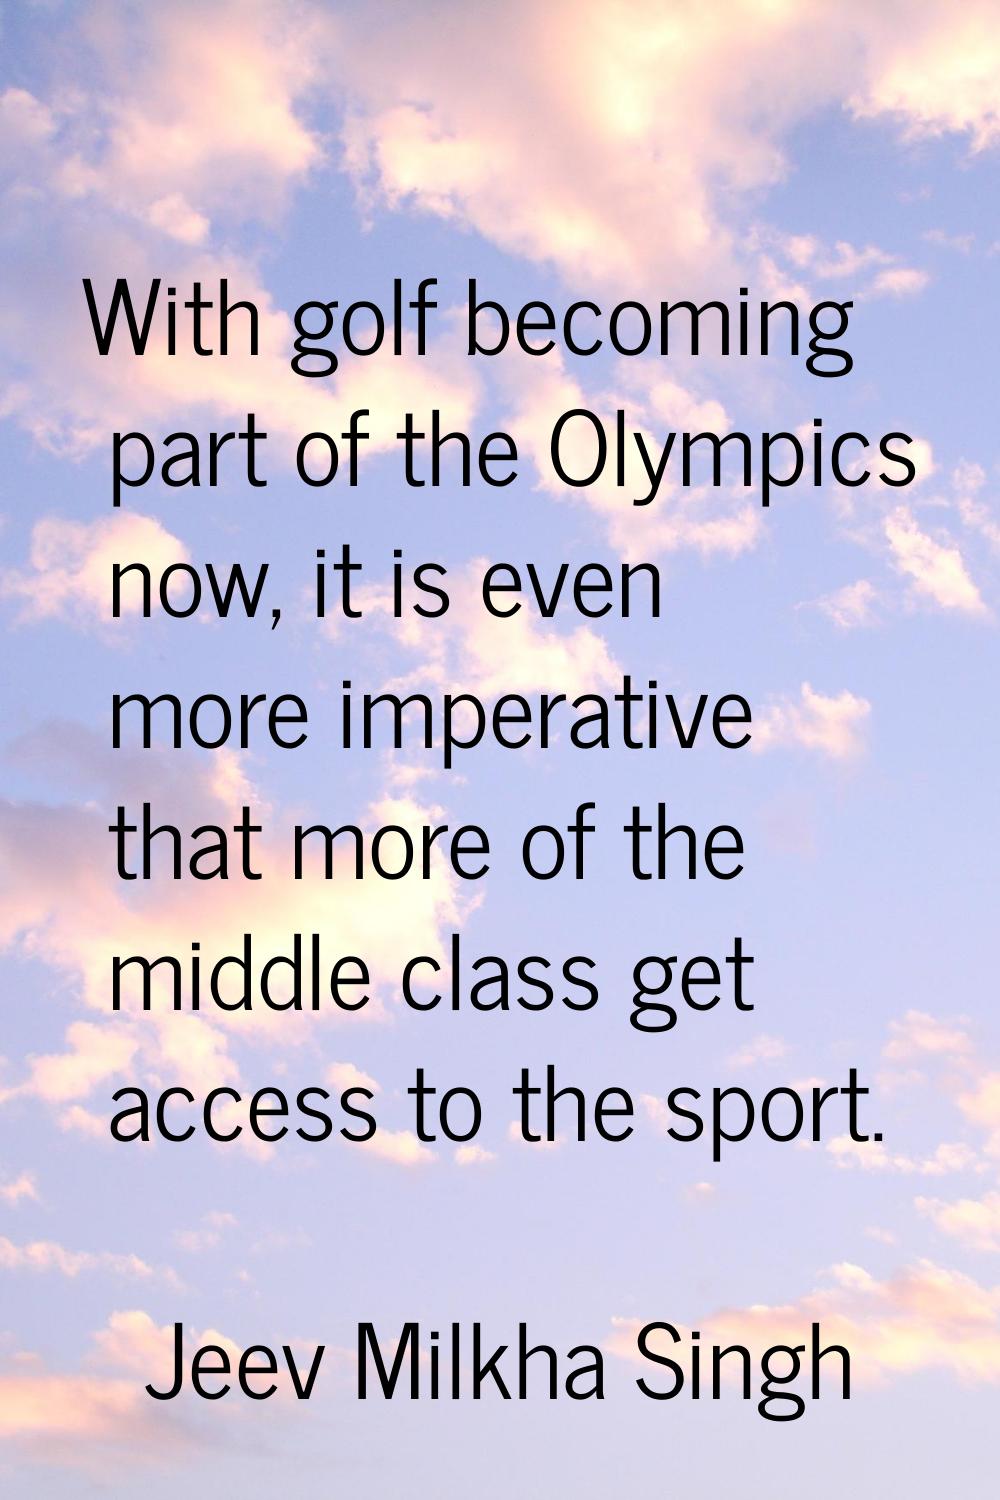 With golf becoming part of the Olympics now, it is even more imperative that more of the middle cla